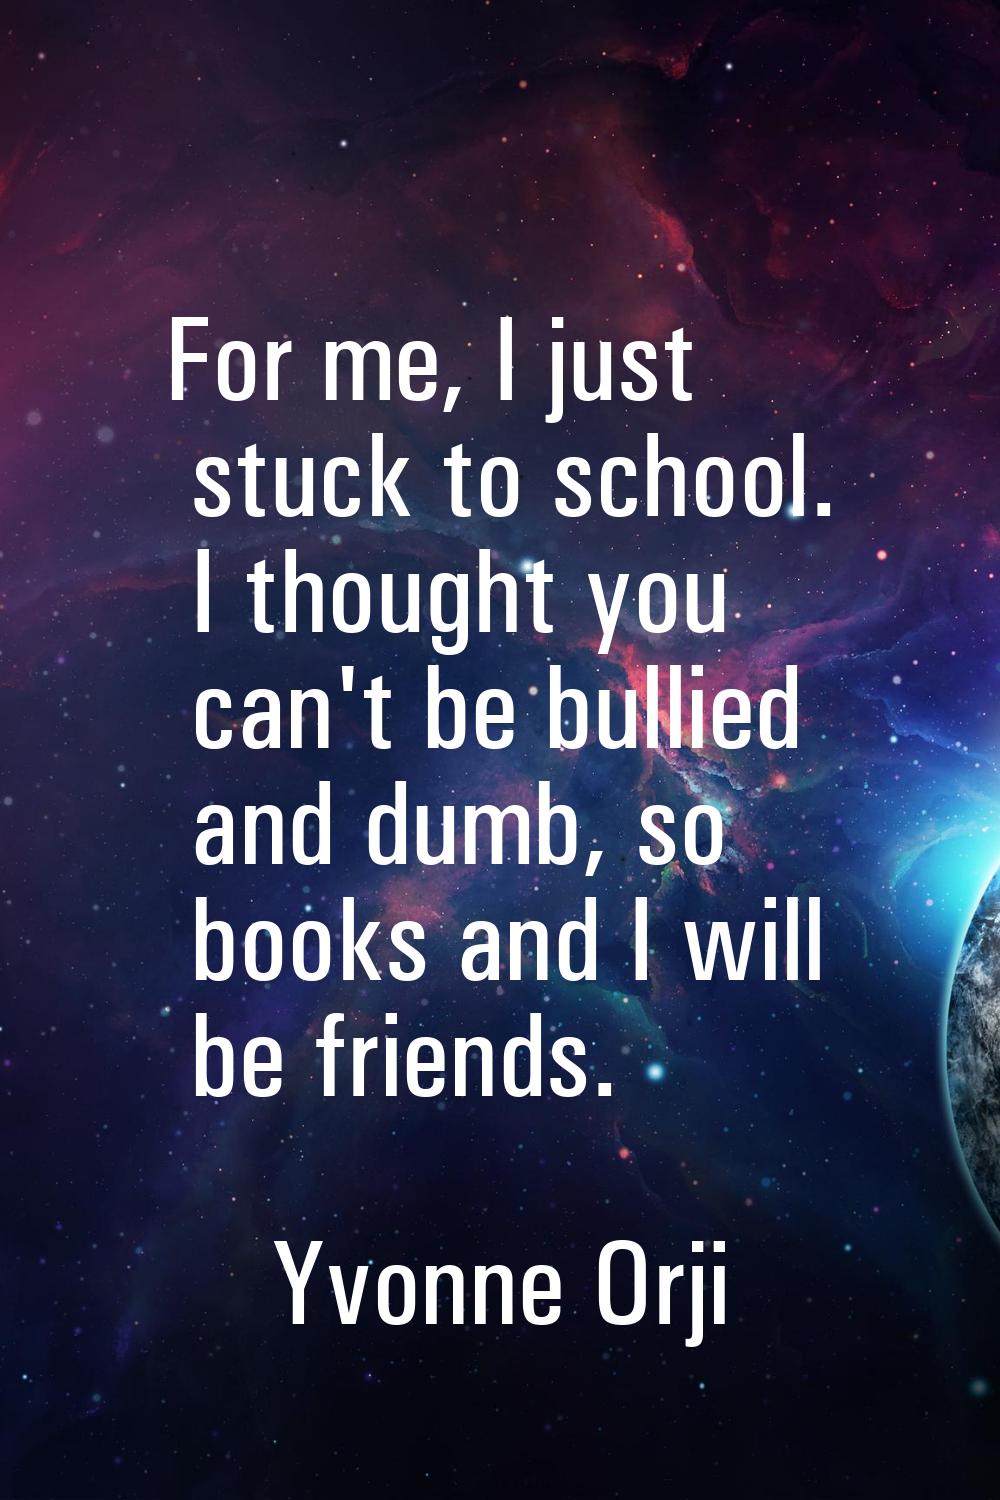 For me, I just stuck to school. I thought you can't be bullied and dumb, so books and I will be fri